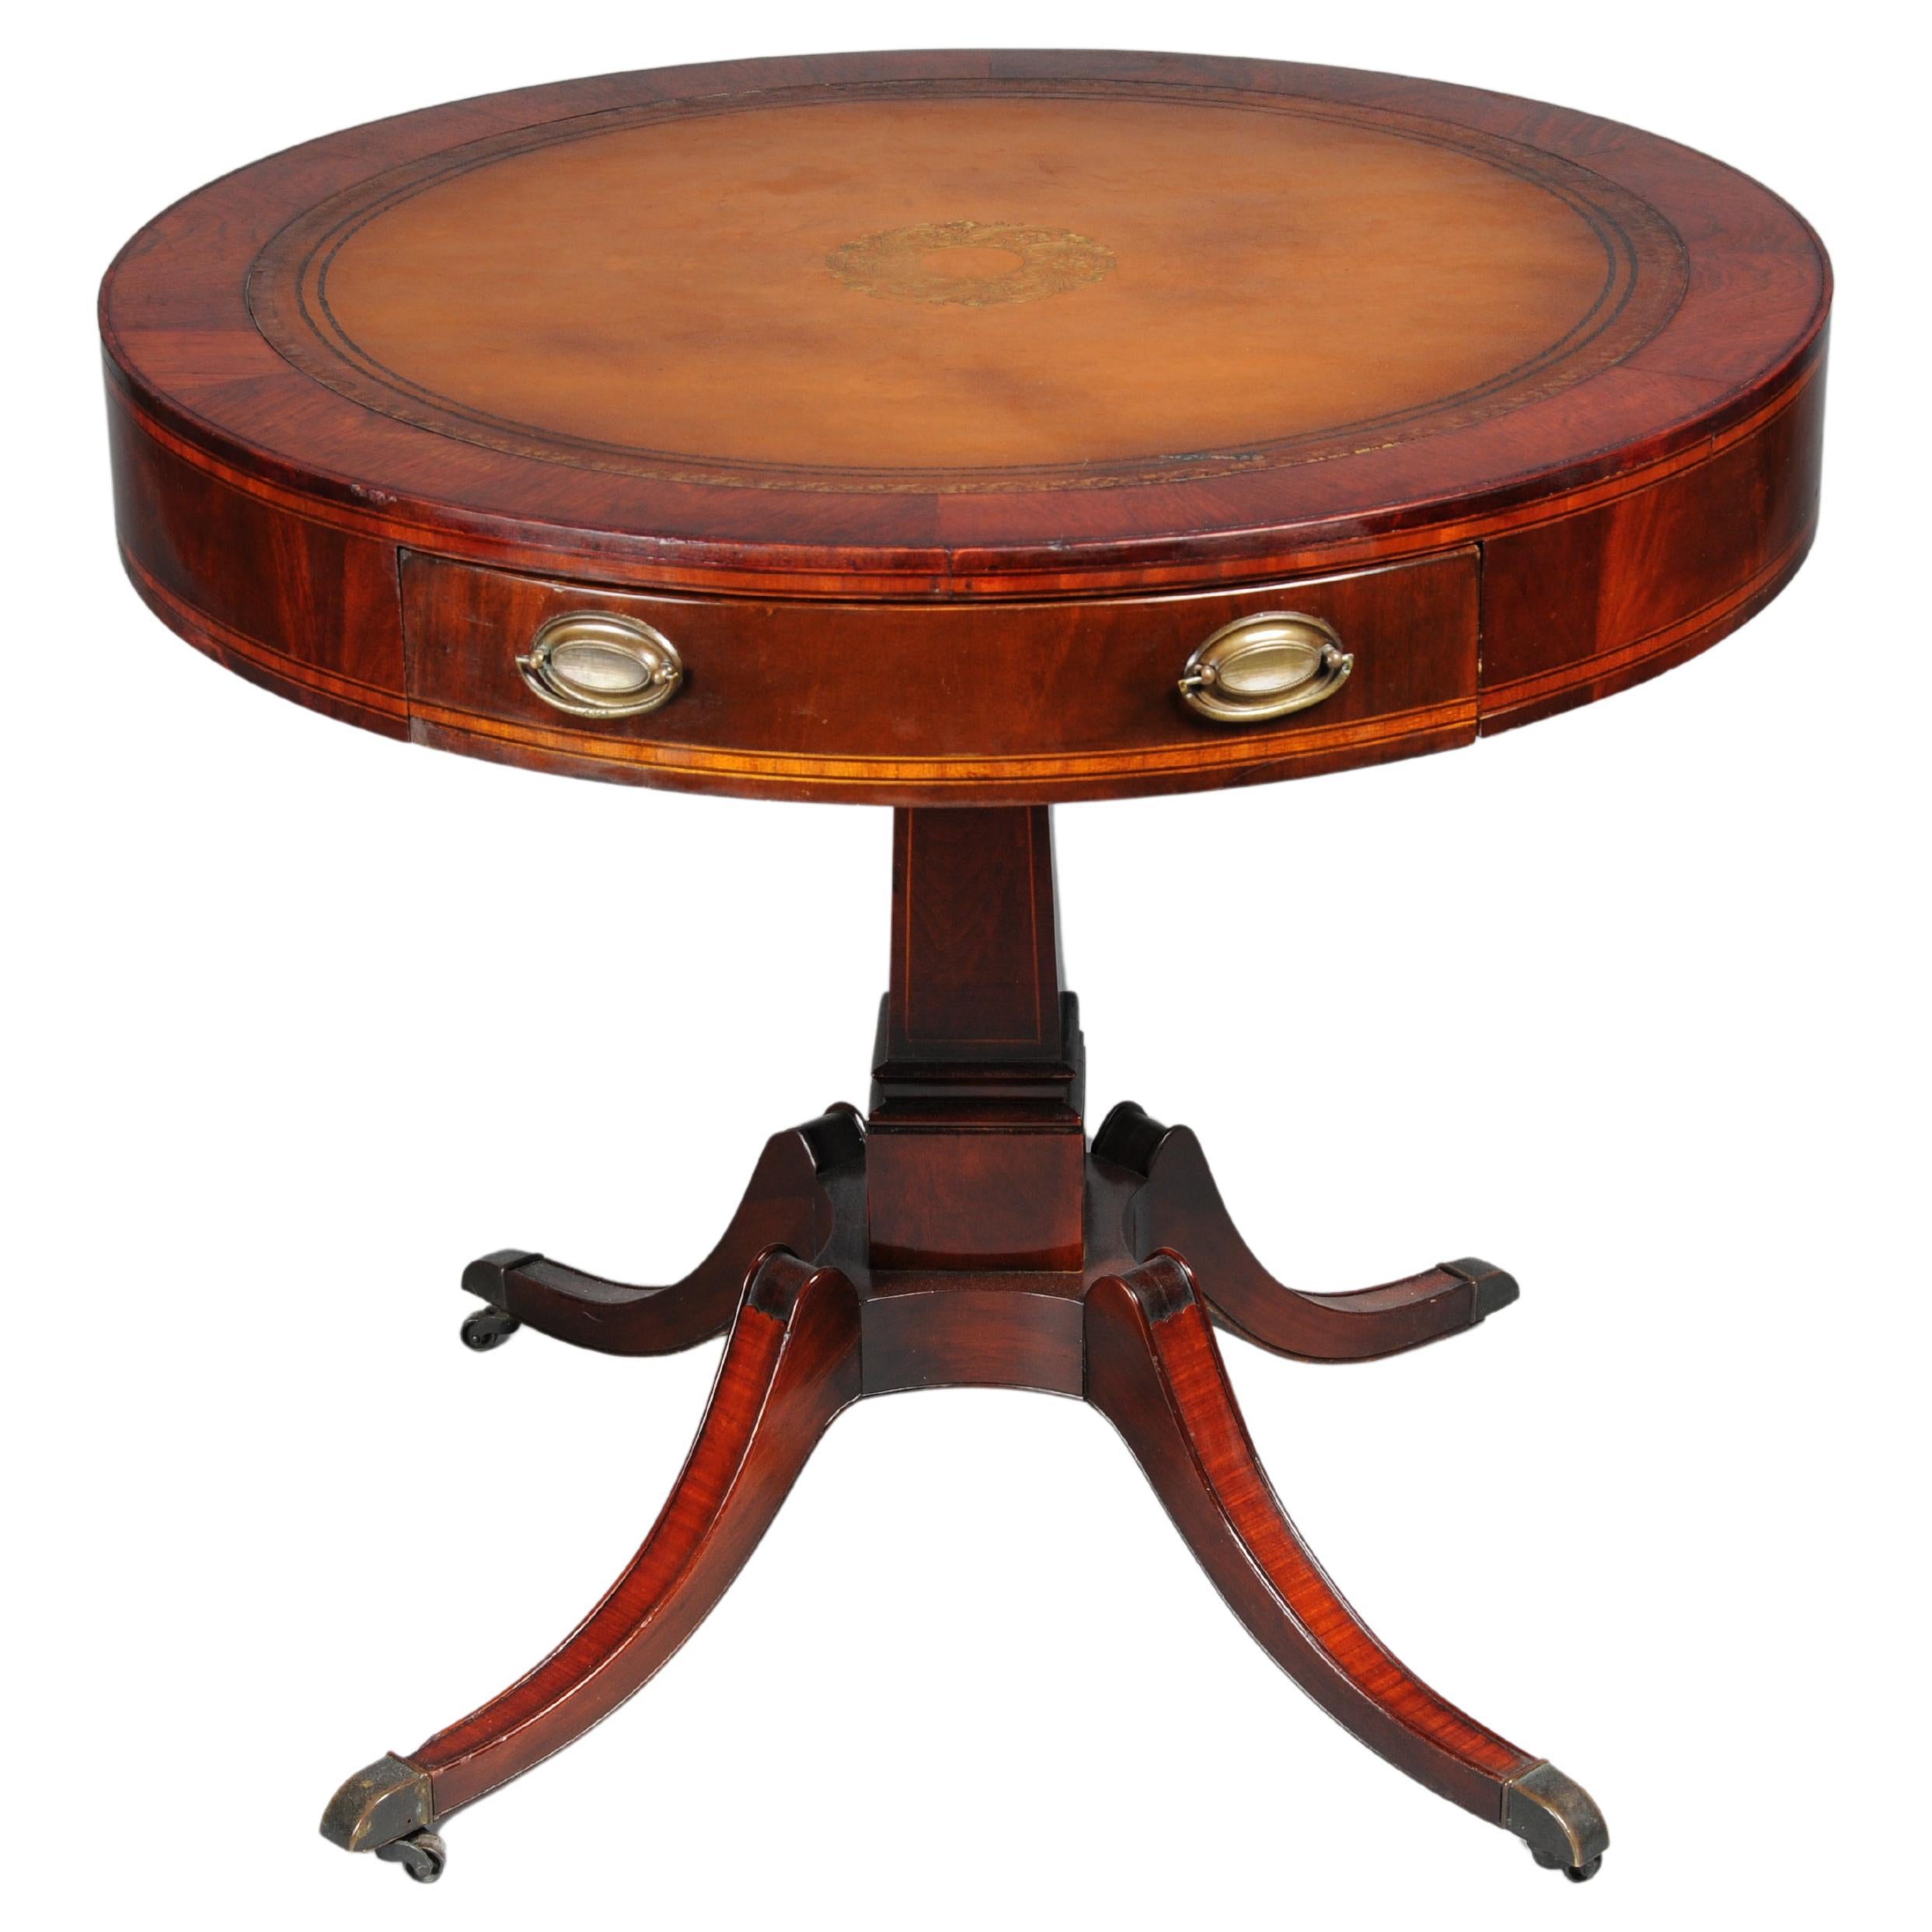 Antique classic English side table with leather top. 19th Century